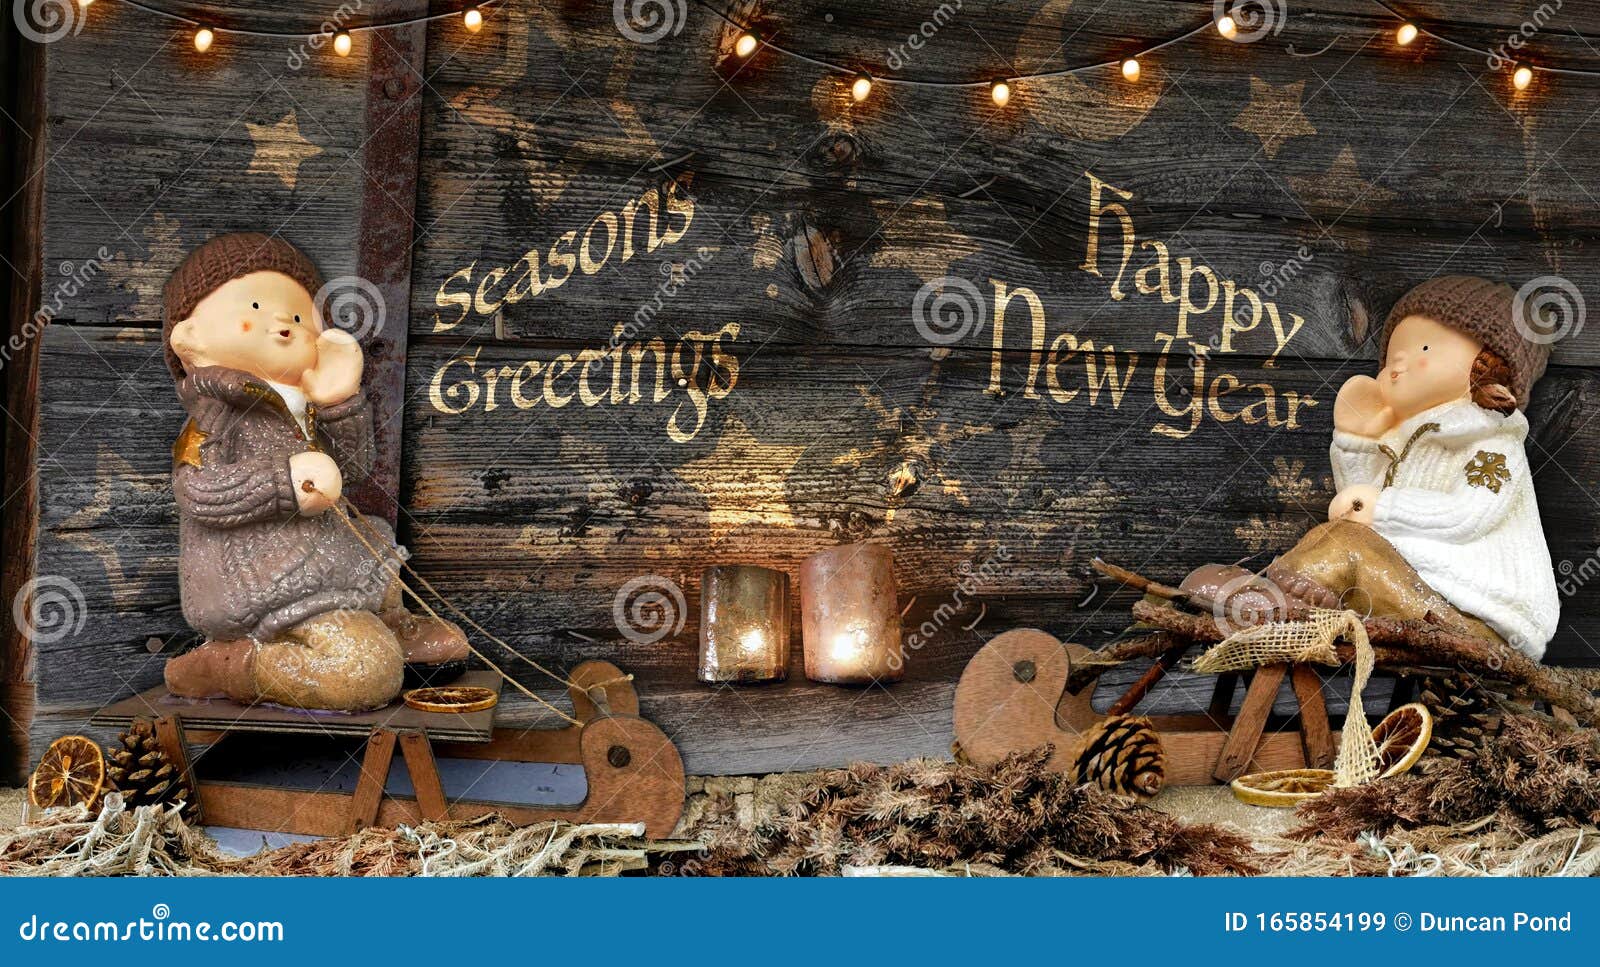 antique style seasons greetings happy new year